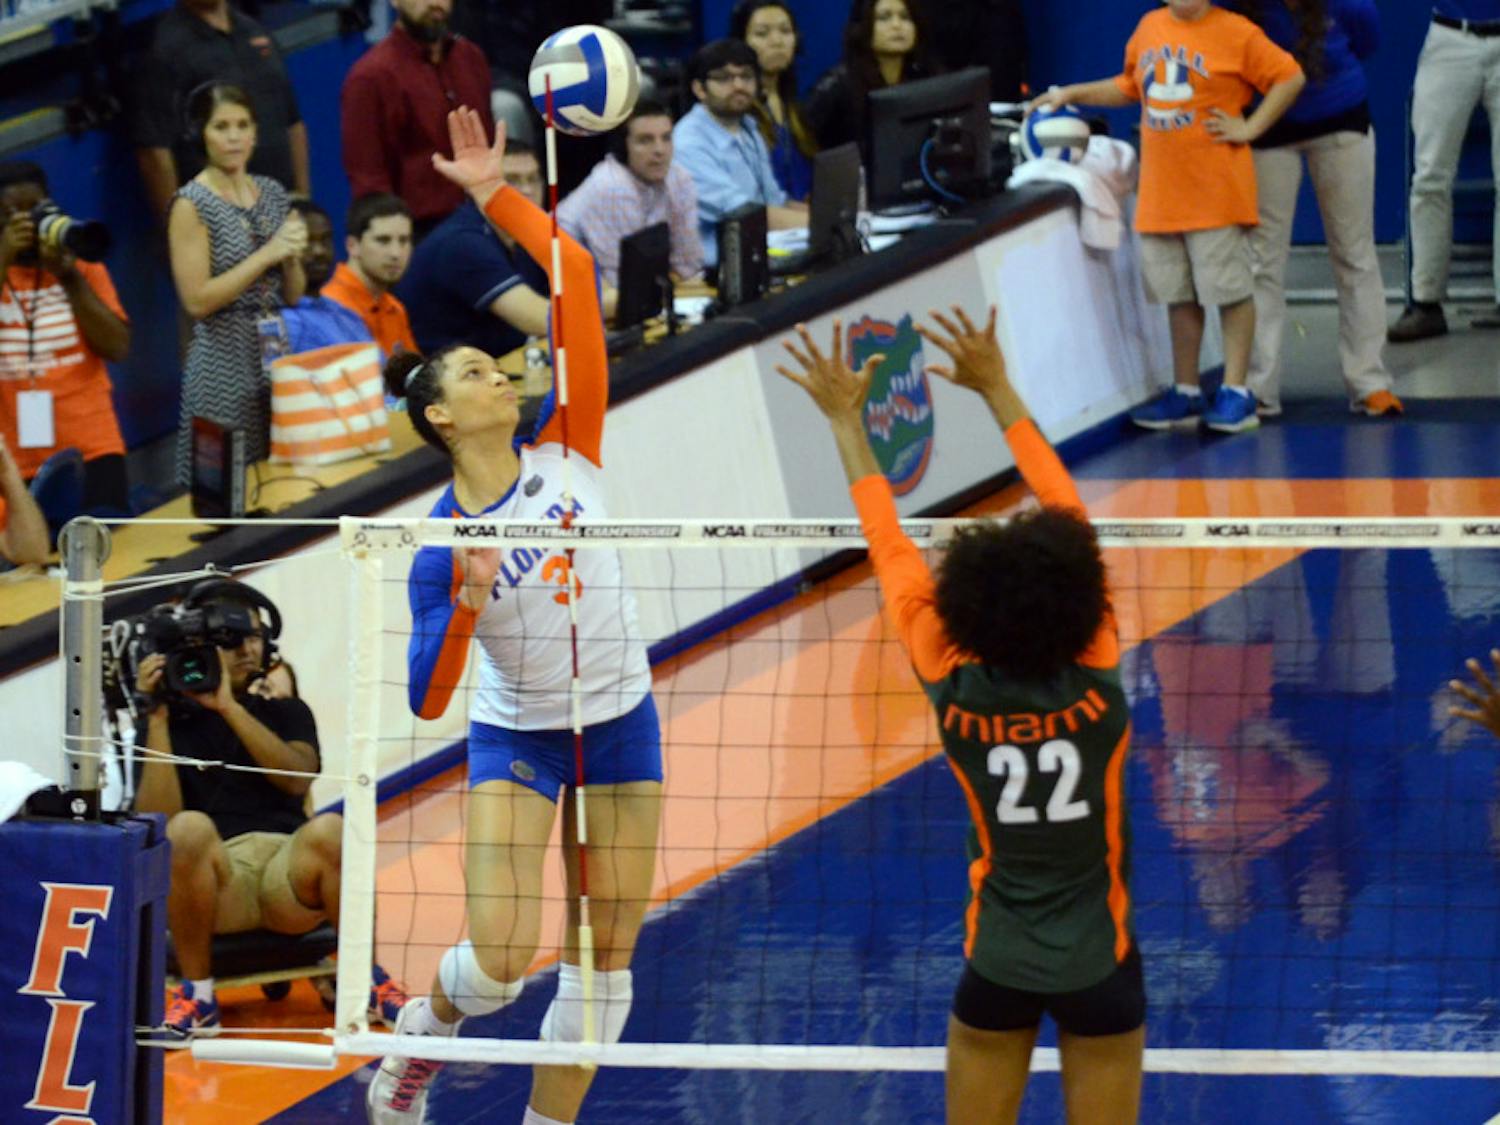 Sophomore right-side hitter Alex Holston swings for a kill attempt during No. 8 seed Florida's 3-1 win against Miami in the second round of the 2014 NCAA Tournament on Dec. 6 in the O'Connell Center.